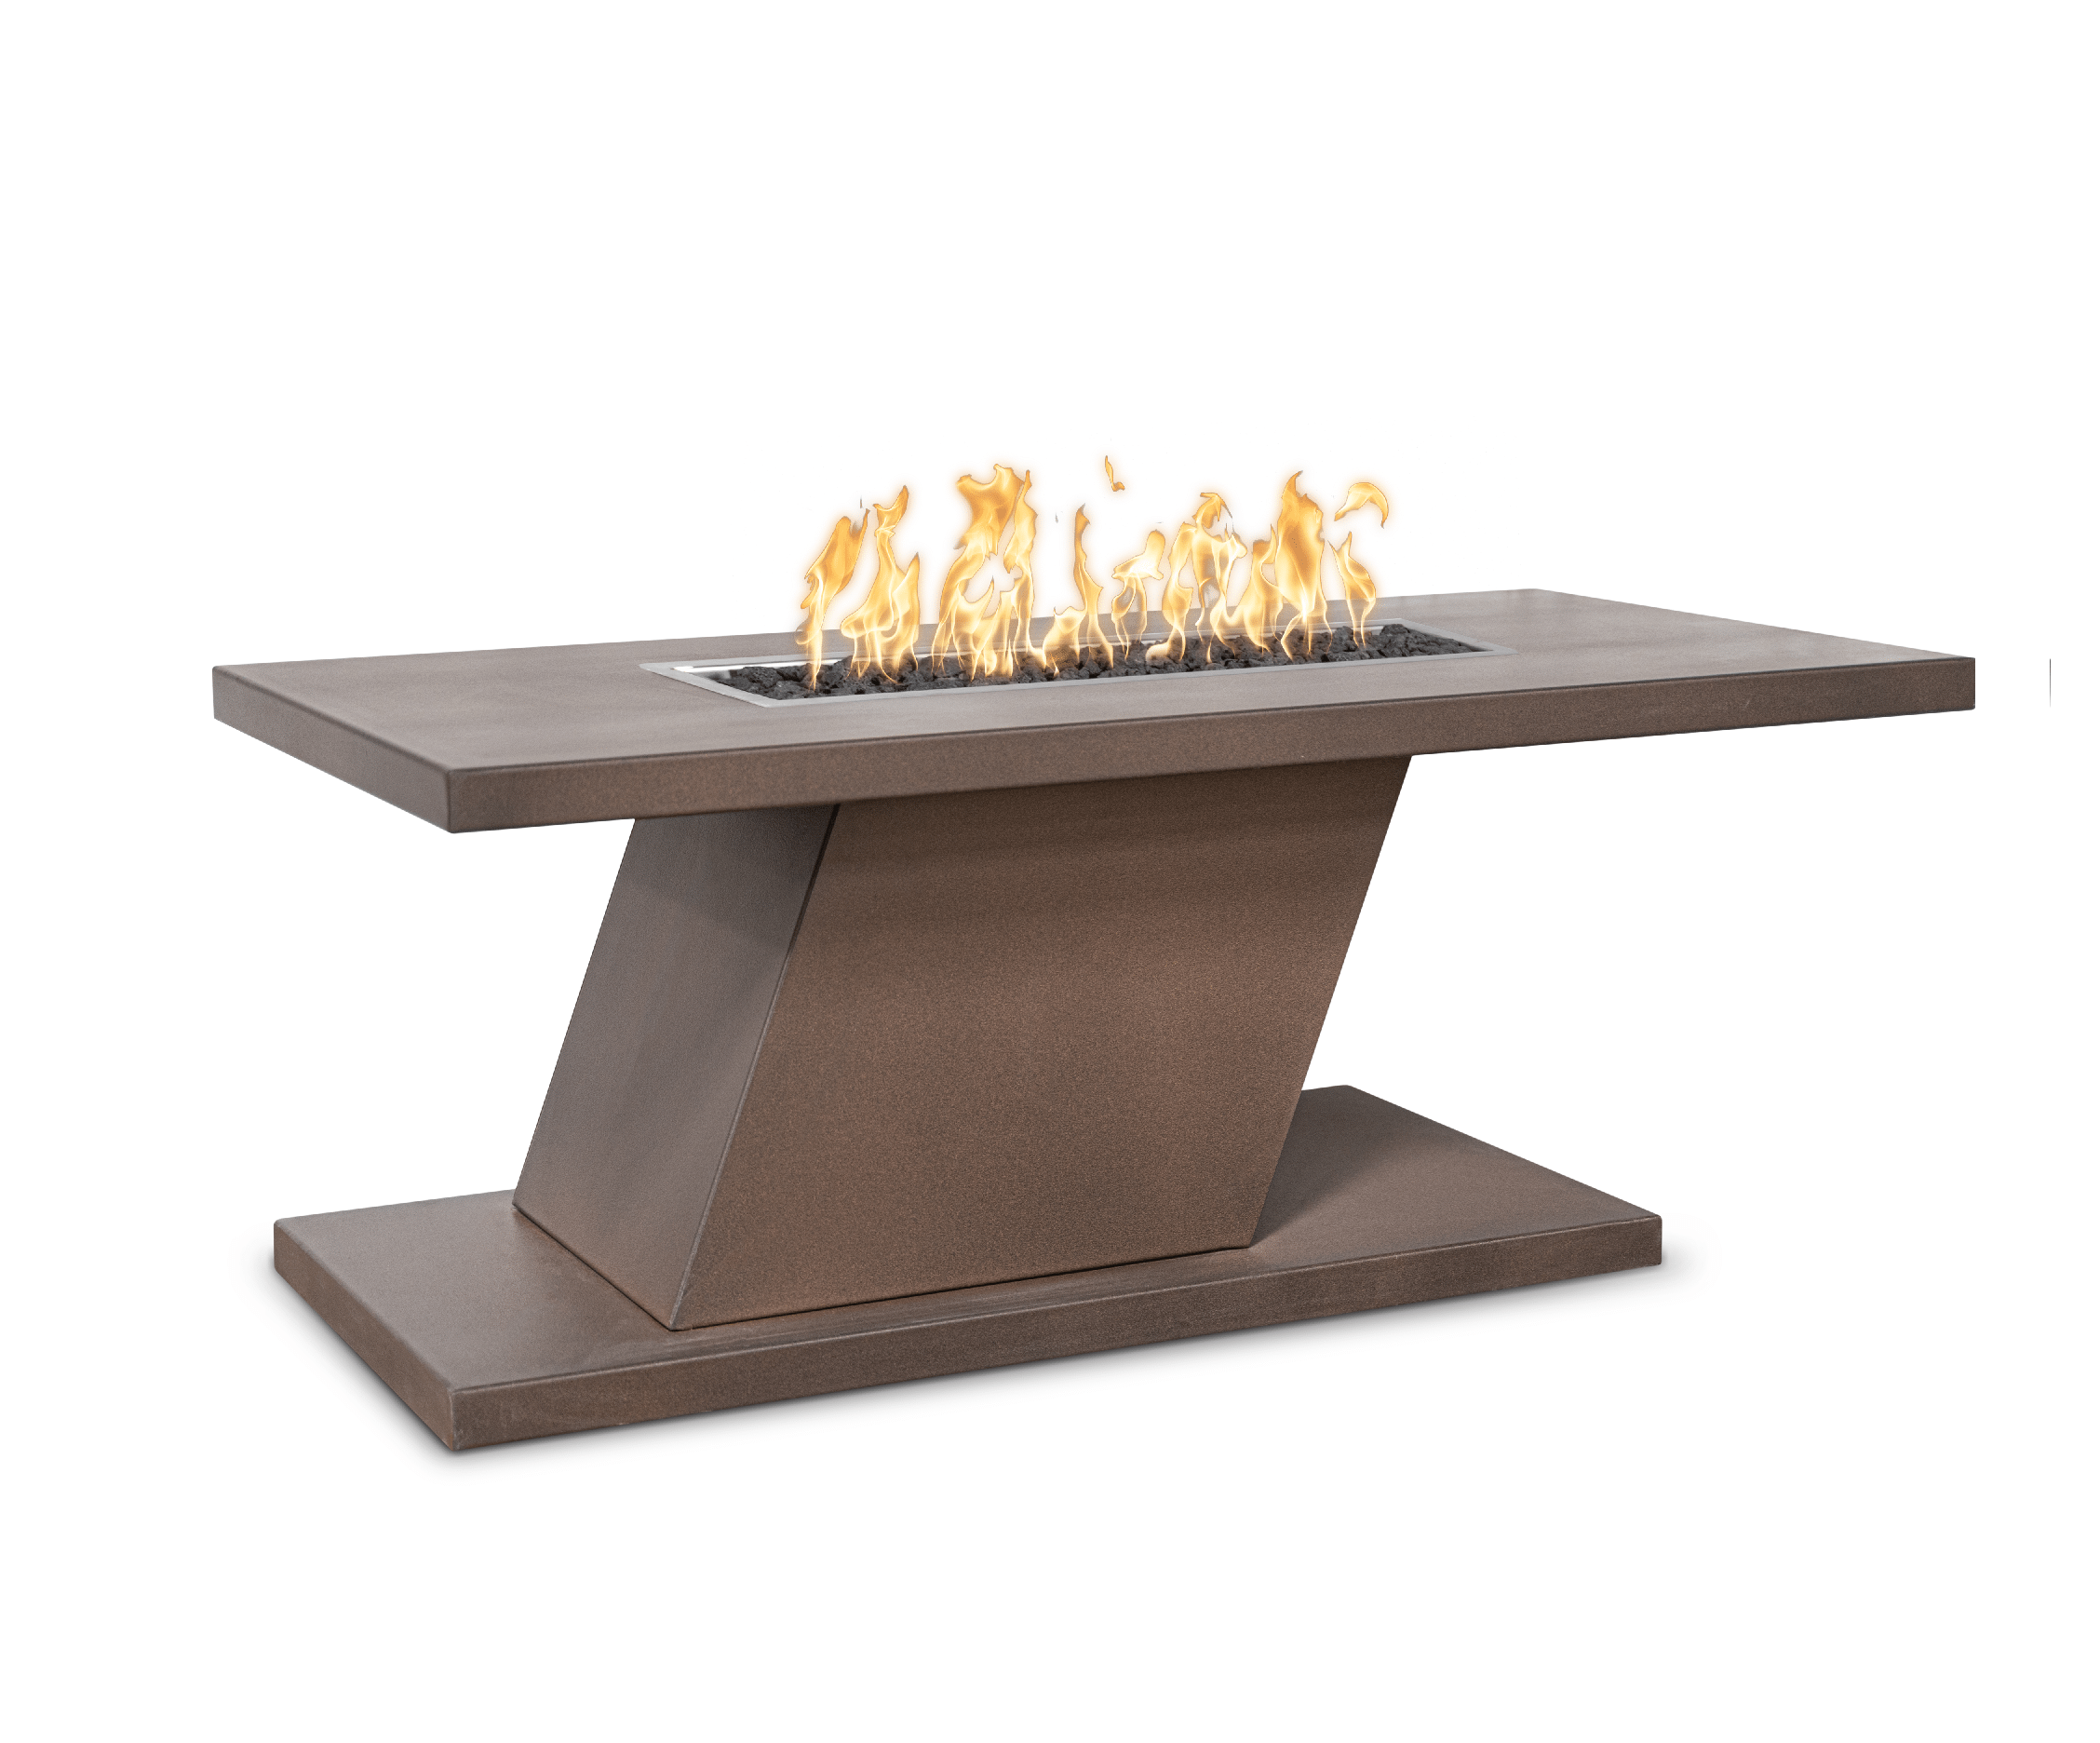 The Outdoor Plus Fire Pit Hammered Copper / 60" x 30" / Match Lit The Outdoor Plus Imperial 24″ Tall Fire Pit | Metal Collection OPT-IMCPR6024